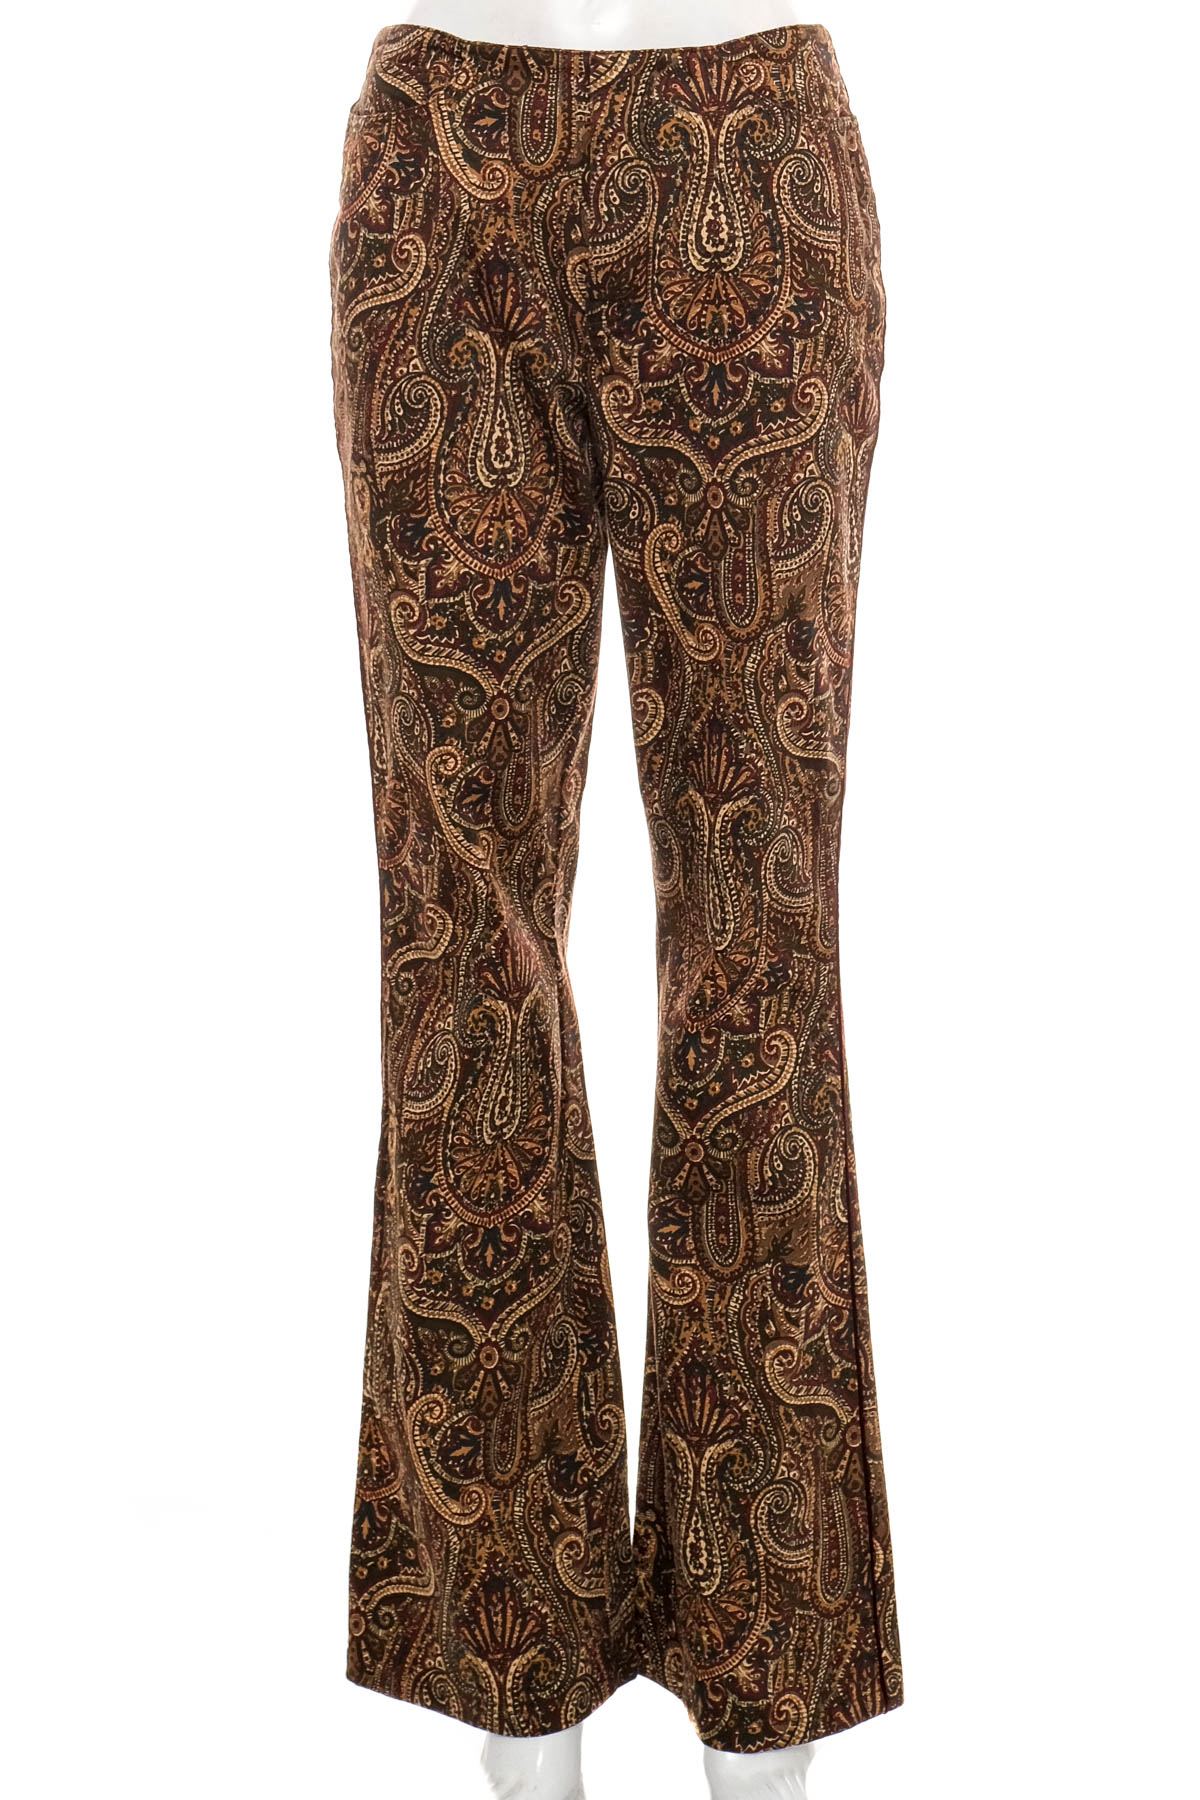 Women's trousers - Cambio Jeans - 0